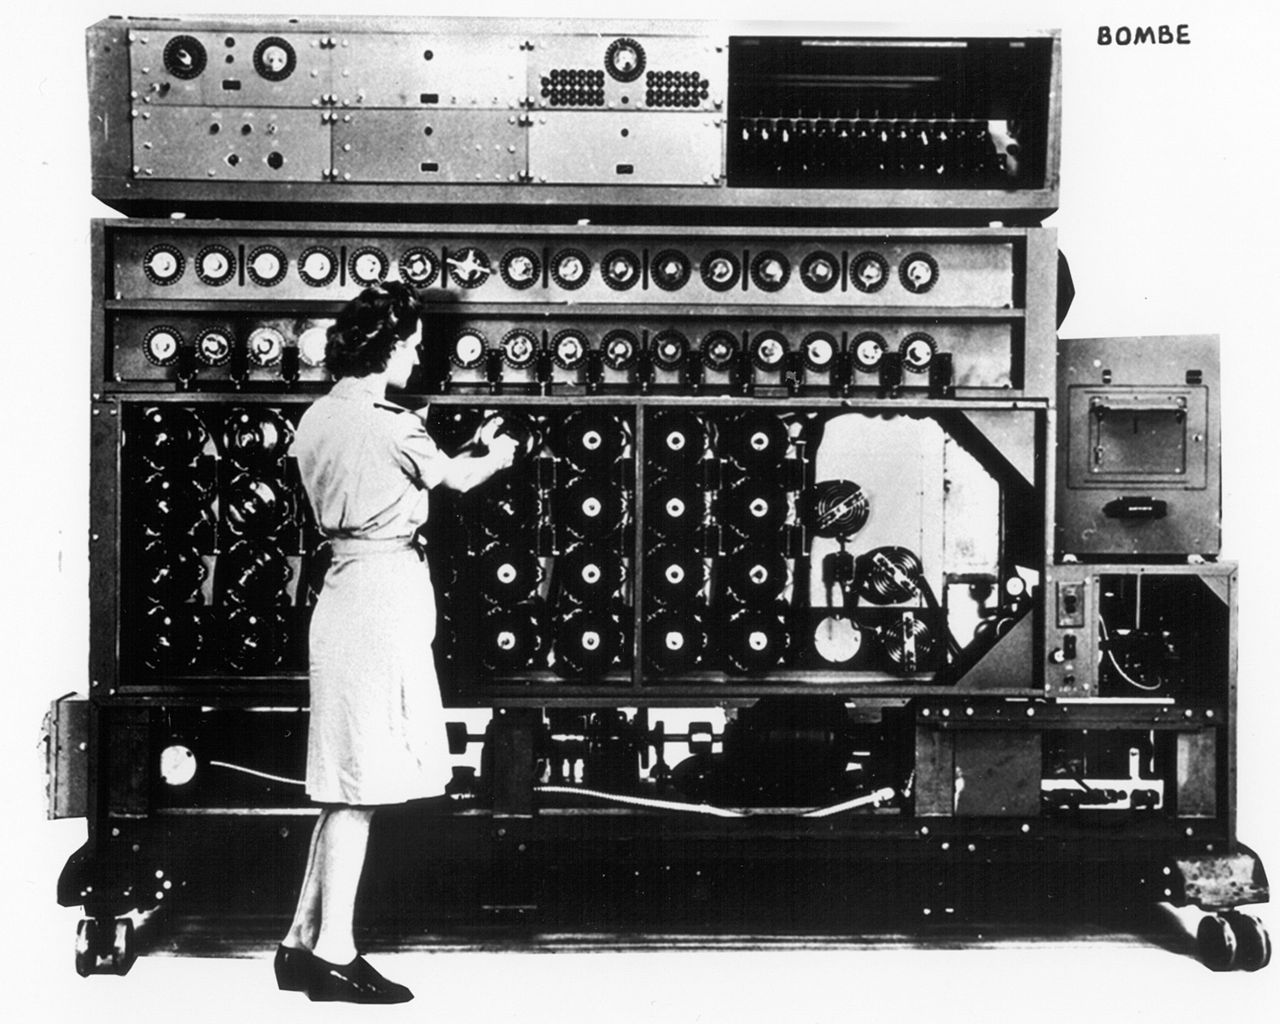 Bombe Computing Device Eliminated All Possible Encryptions From Intercepted Messages Until It Arrived At The Correct Solution.